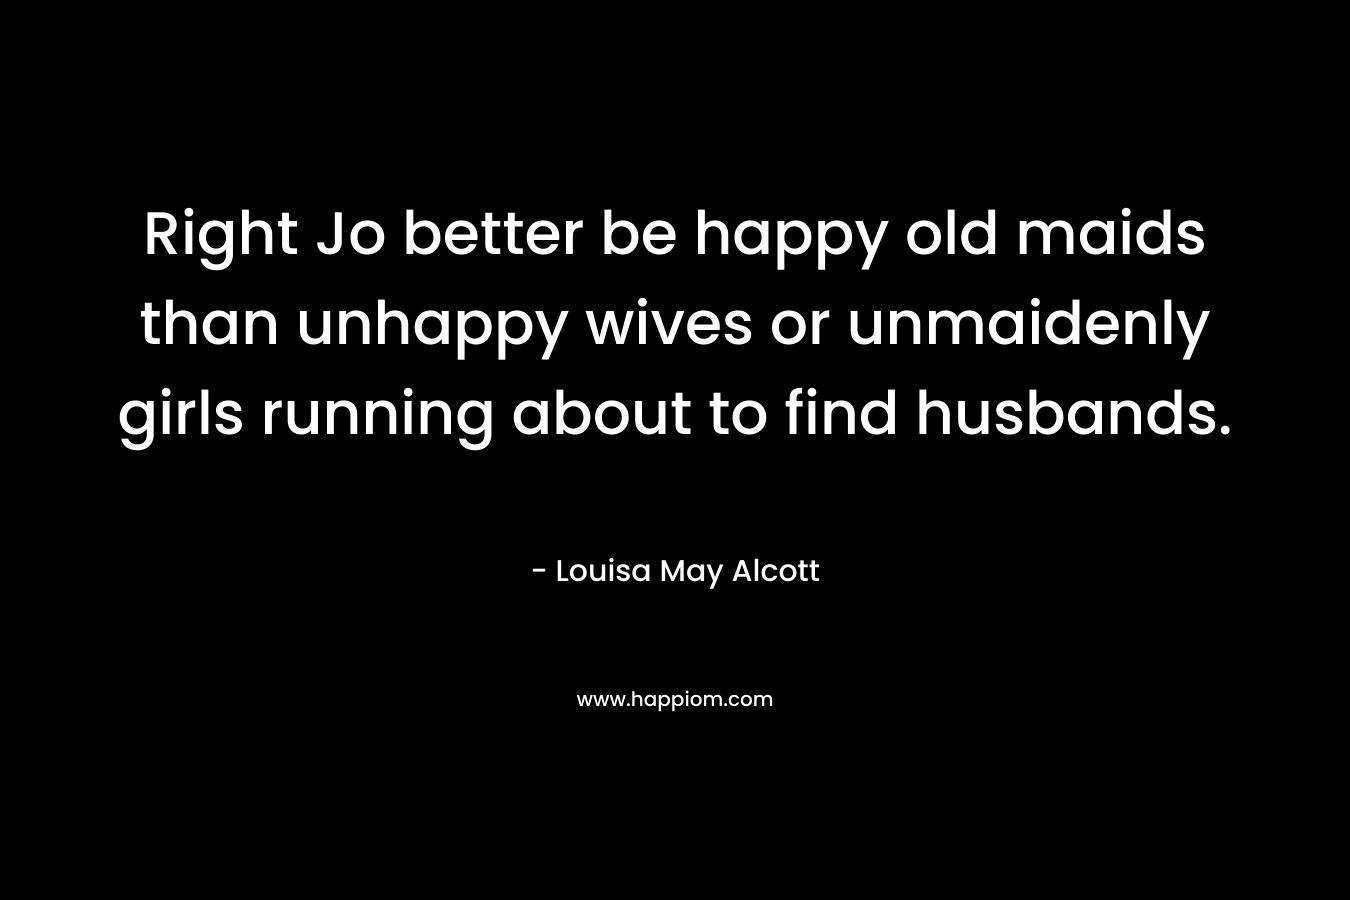 Right Jo better be happy old maids than unhappy wives or unmaidenly girls running about to find husbands. – Louisa May Alcott